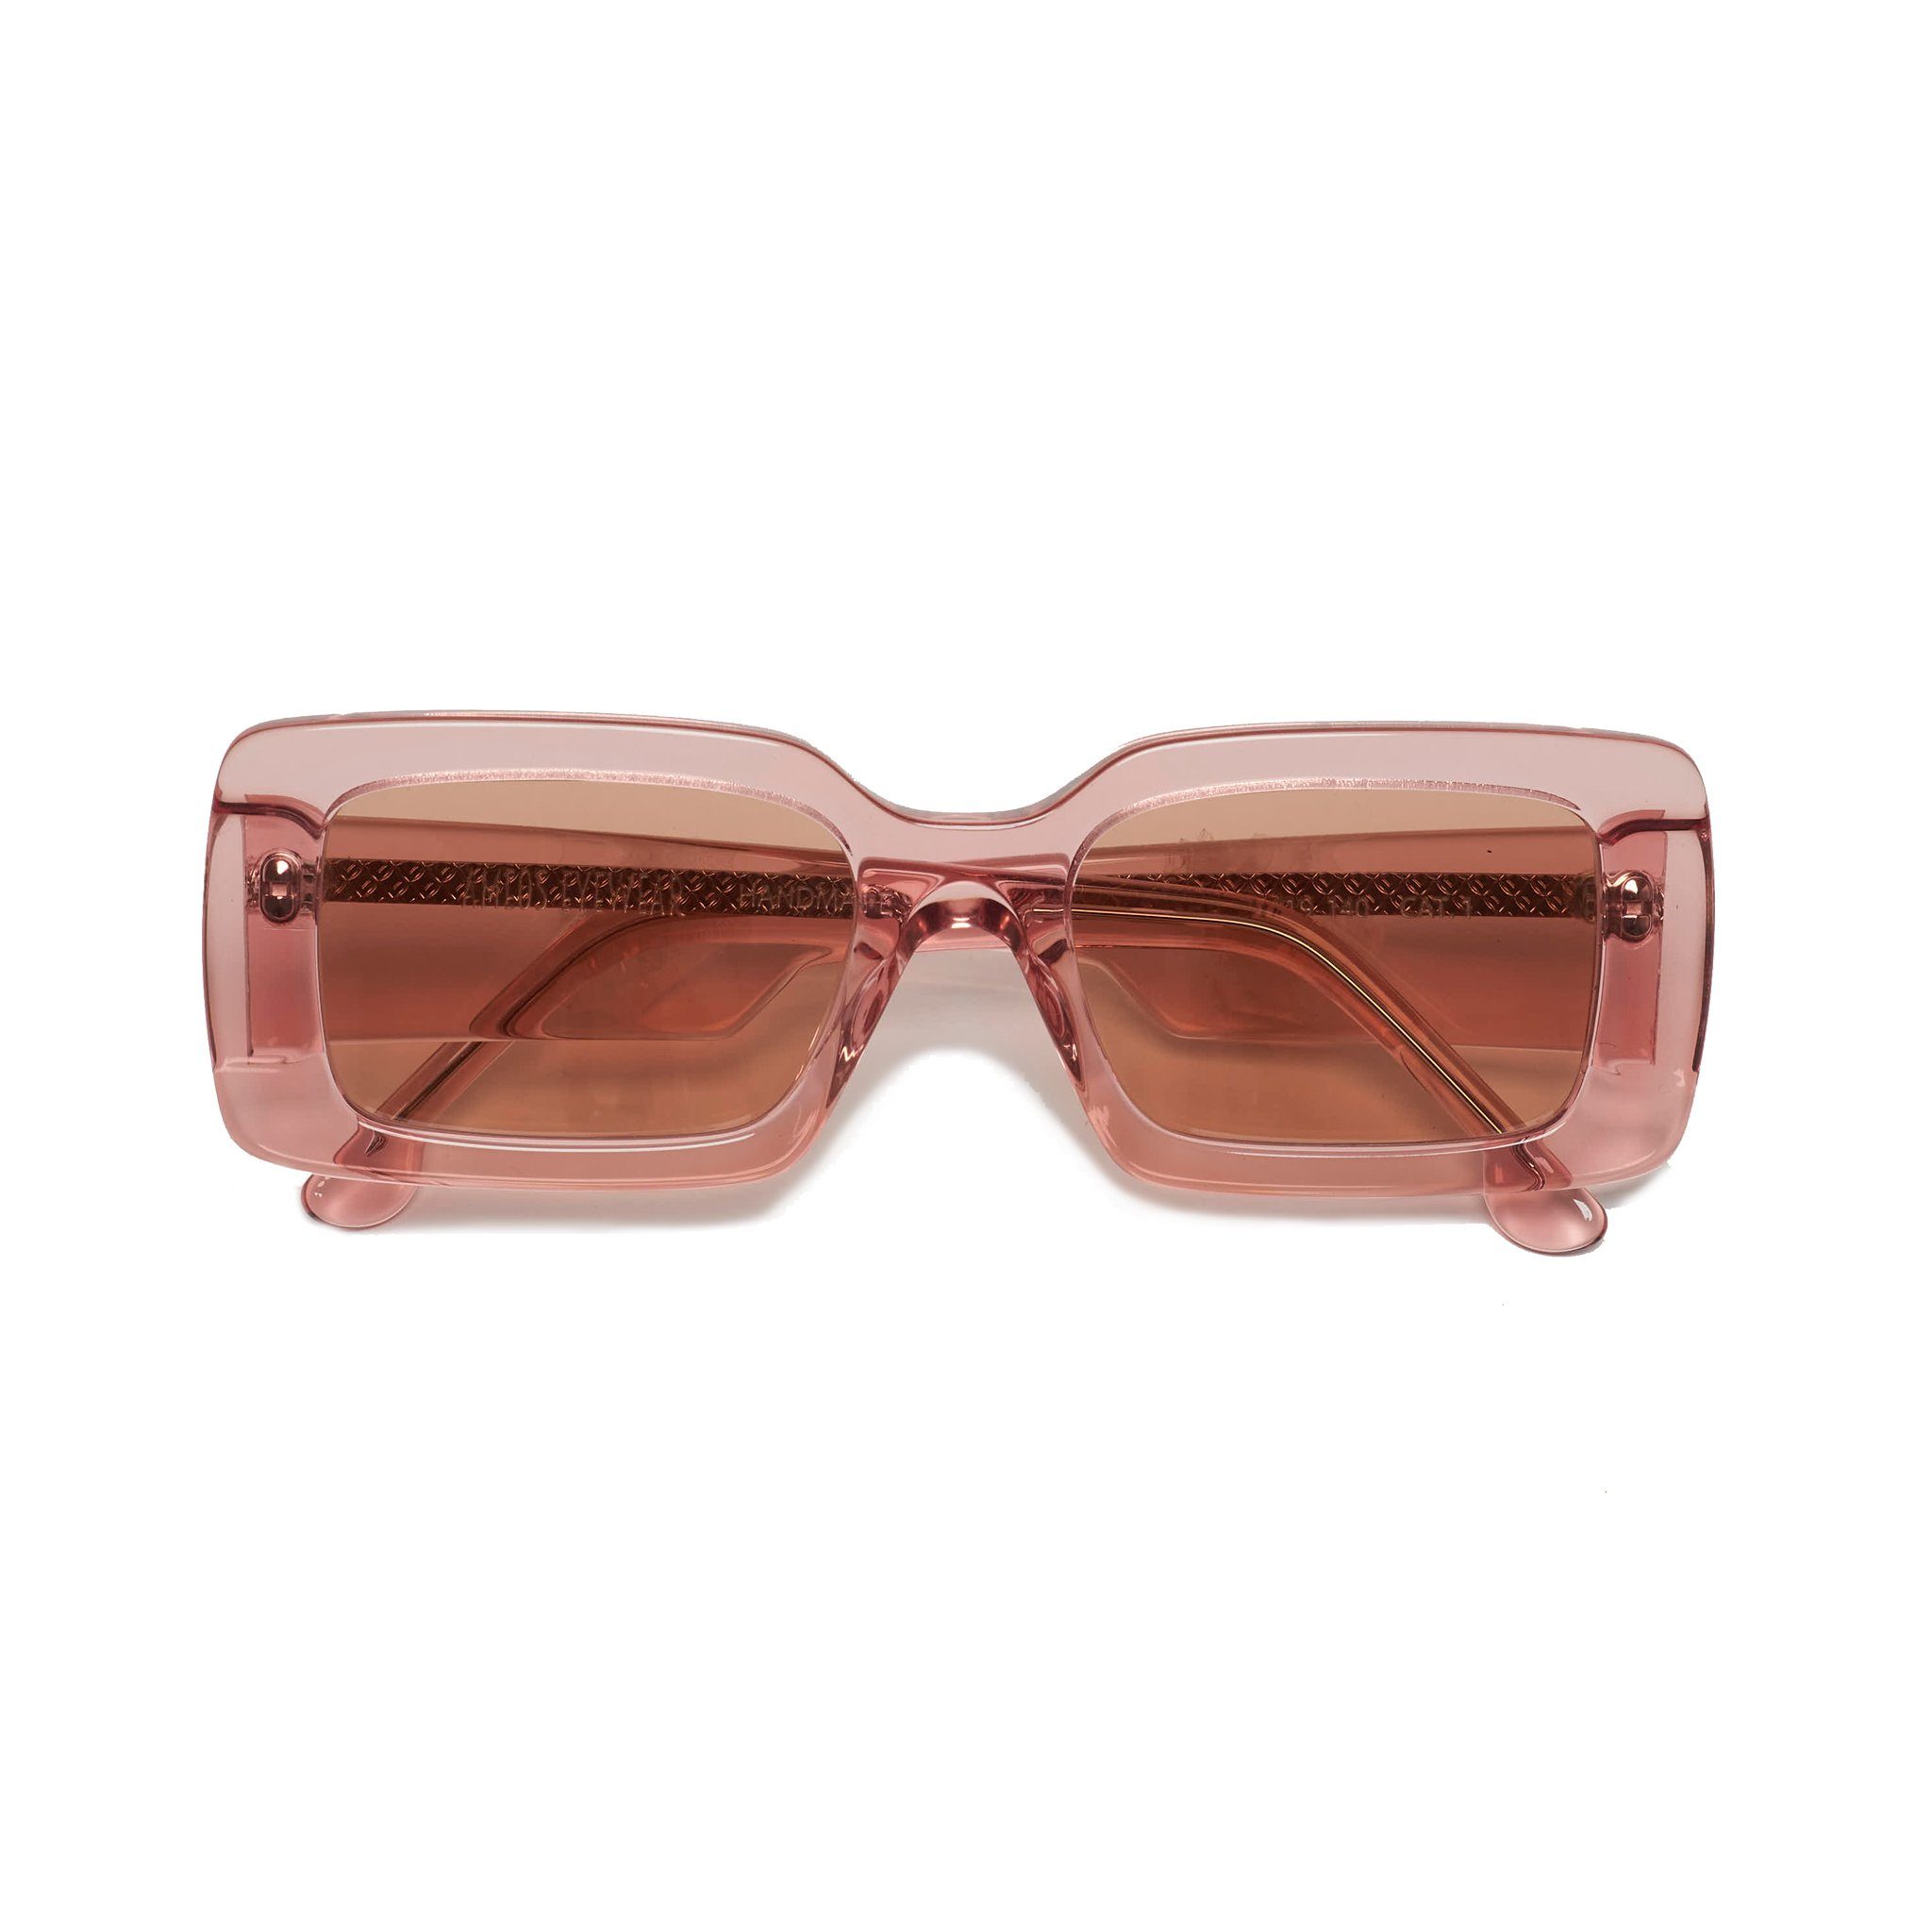 Transparent pink frames sunglasses with pink lenses. Front view temples crossed